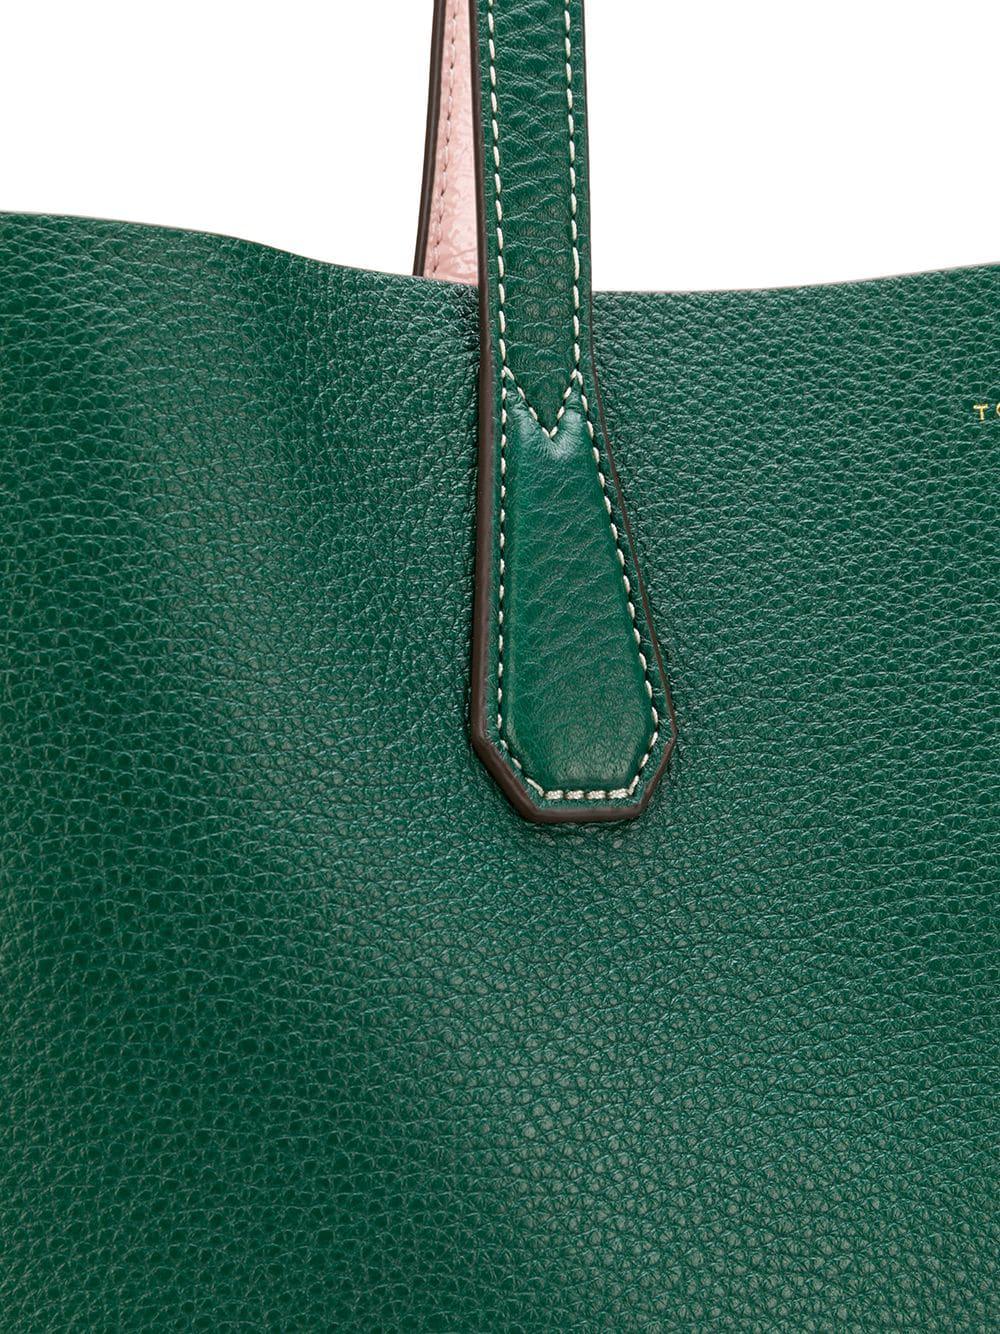 Tory Burch Leather Perry Reversible Tote Bag in Green | Lyst